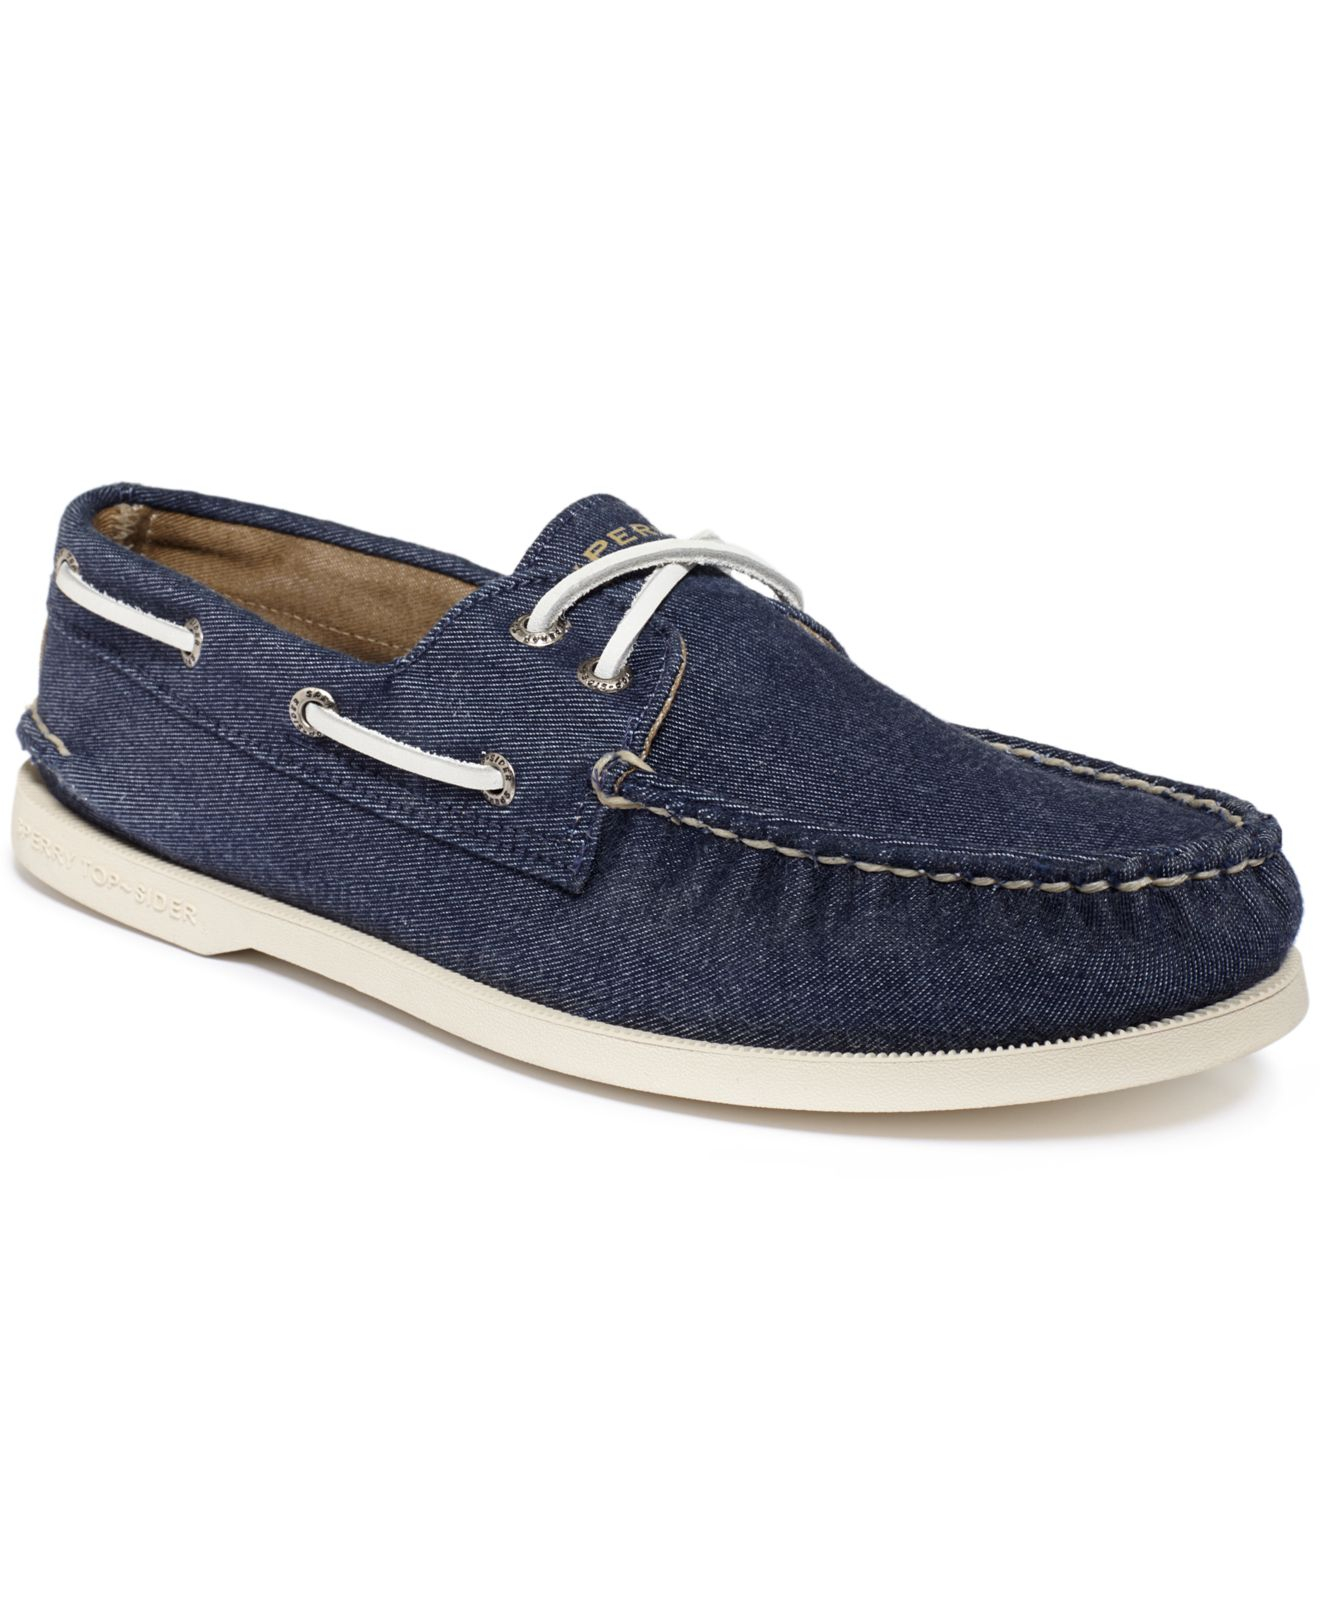 Sperry Top-Sider Authentic Original A/O Soft Canvas Boat Shoes in Navy ...